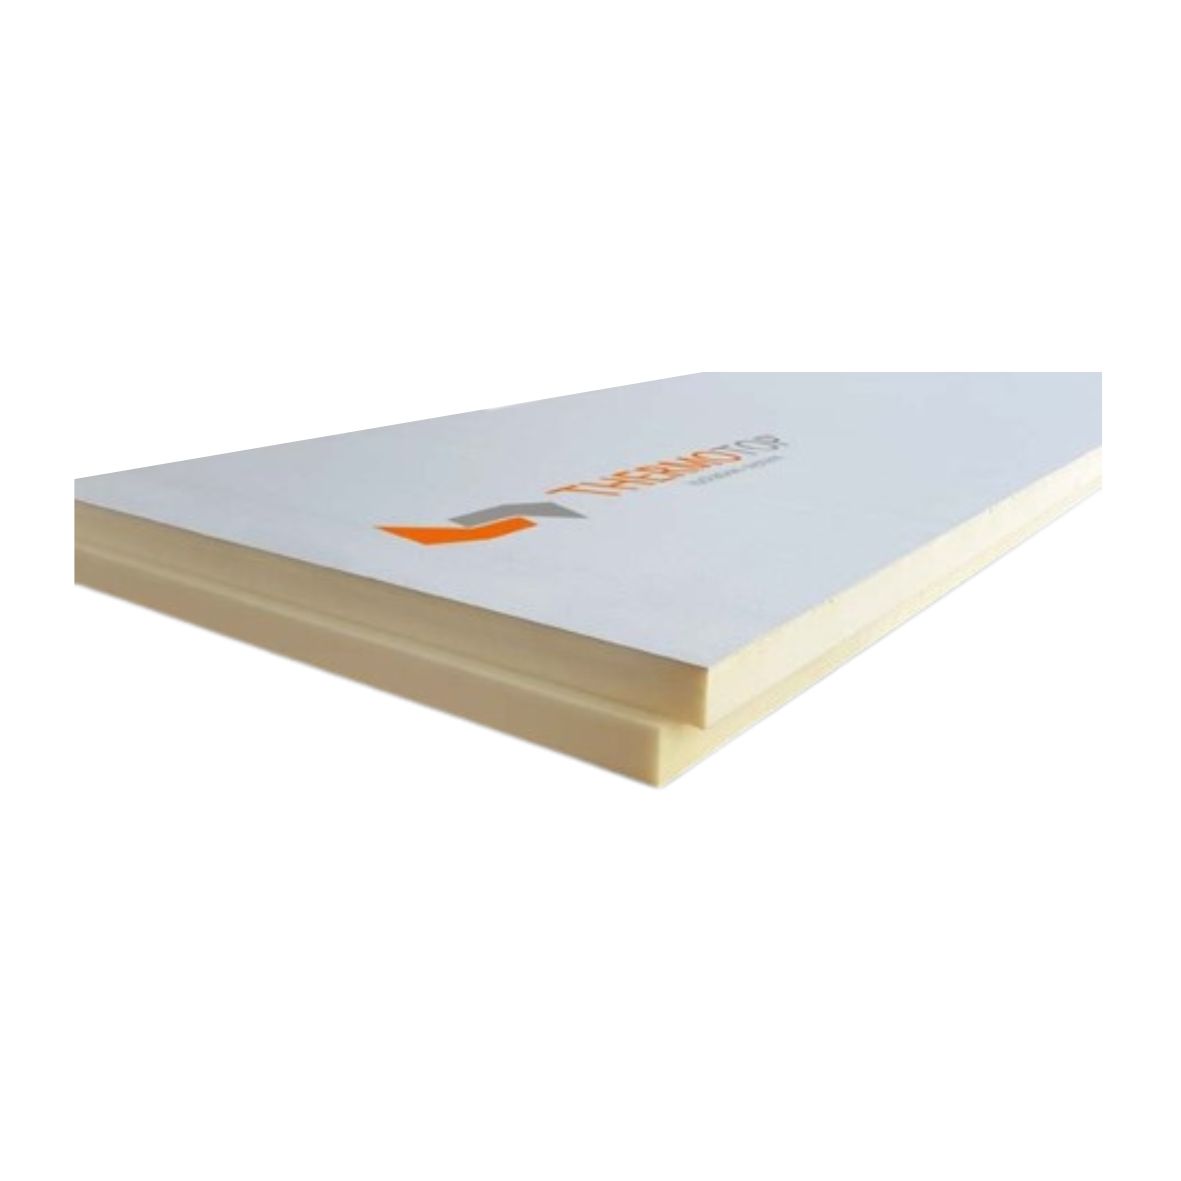 PIR Thermal insulation boards - Thermotop Toboard PIR BV-BV thermal insulation board 80 x 1200 x 2400 mm, https:maxbau.ro